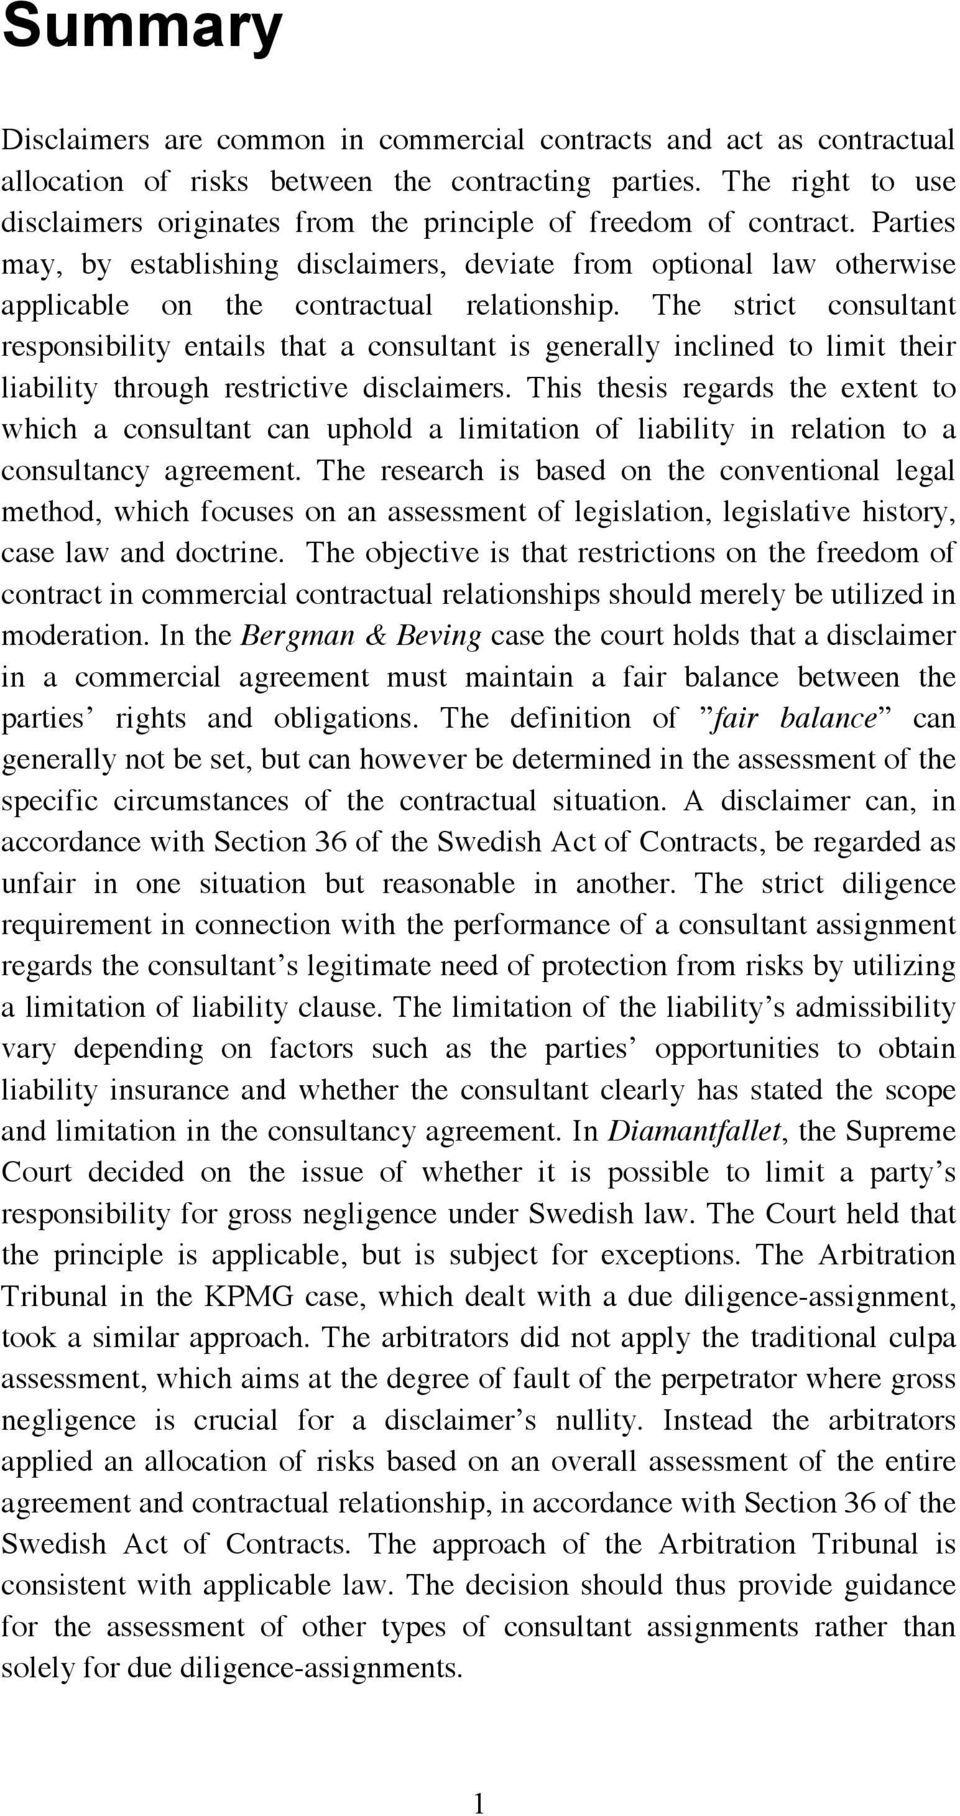 Parties may, by establishing disclaimers, deviate from optional law otherwise applicable on the contractual relationship.